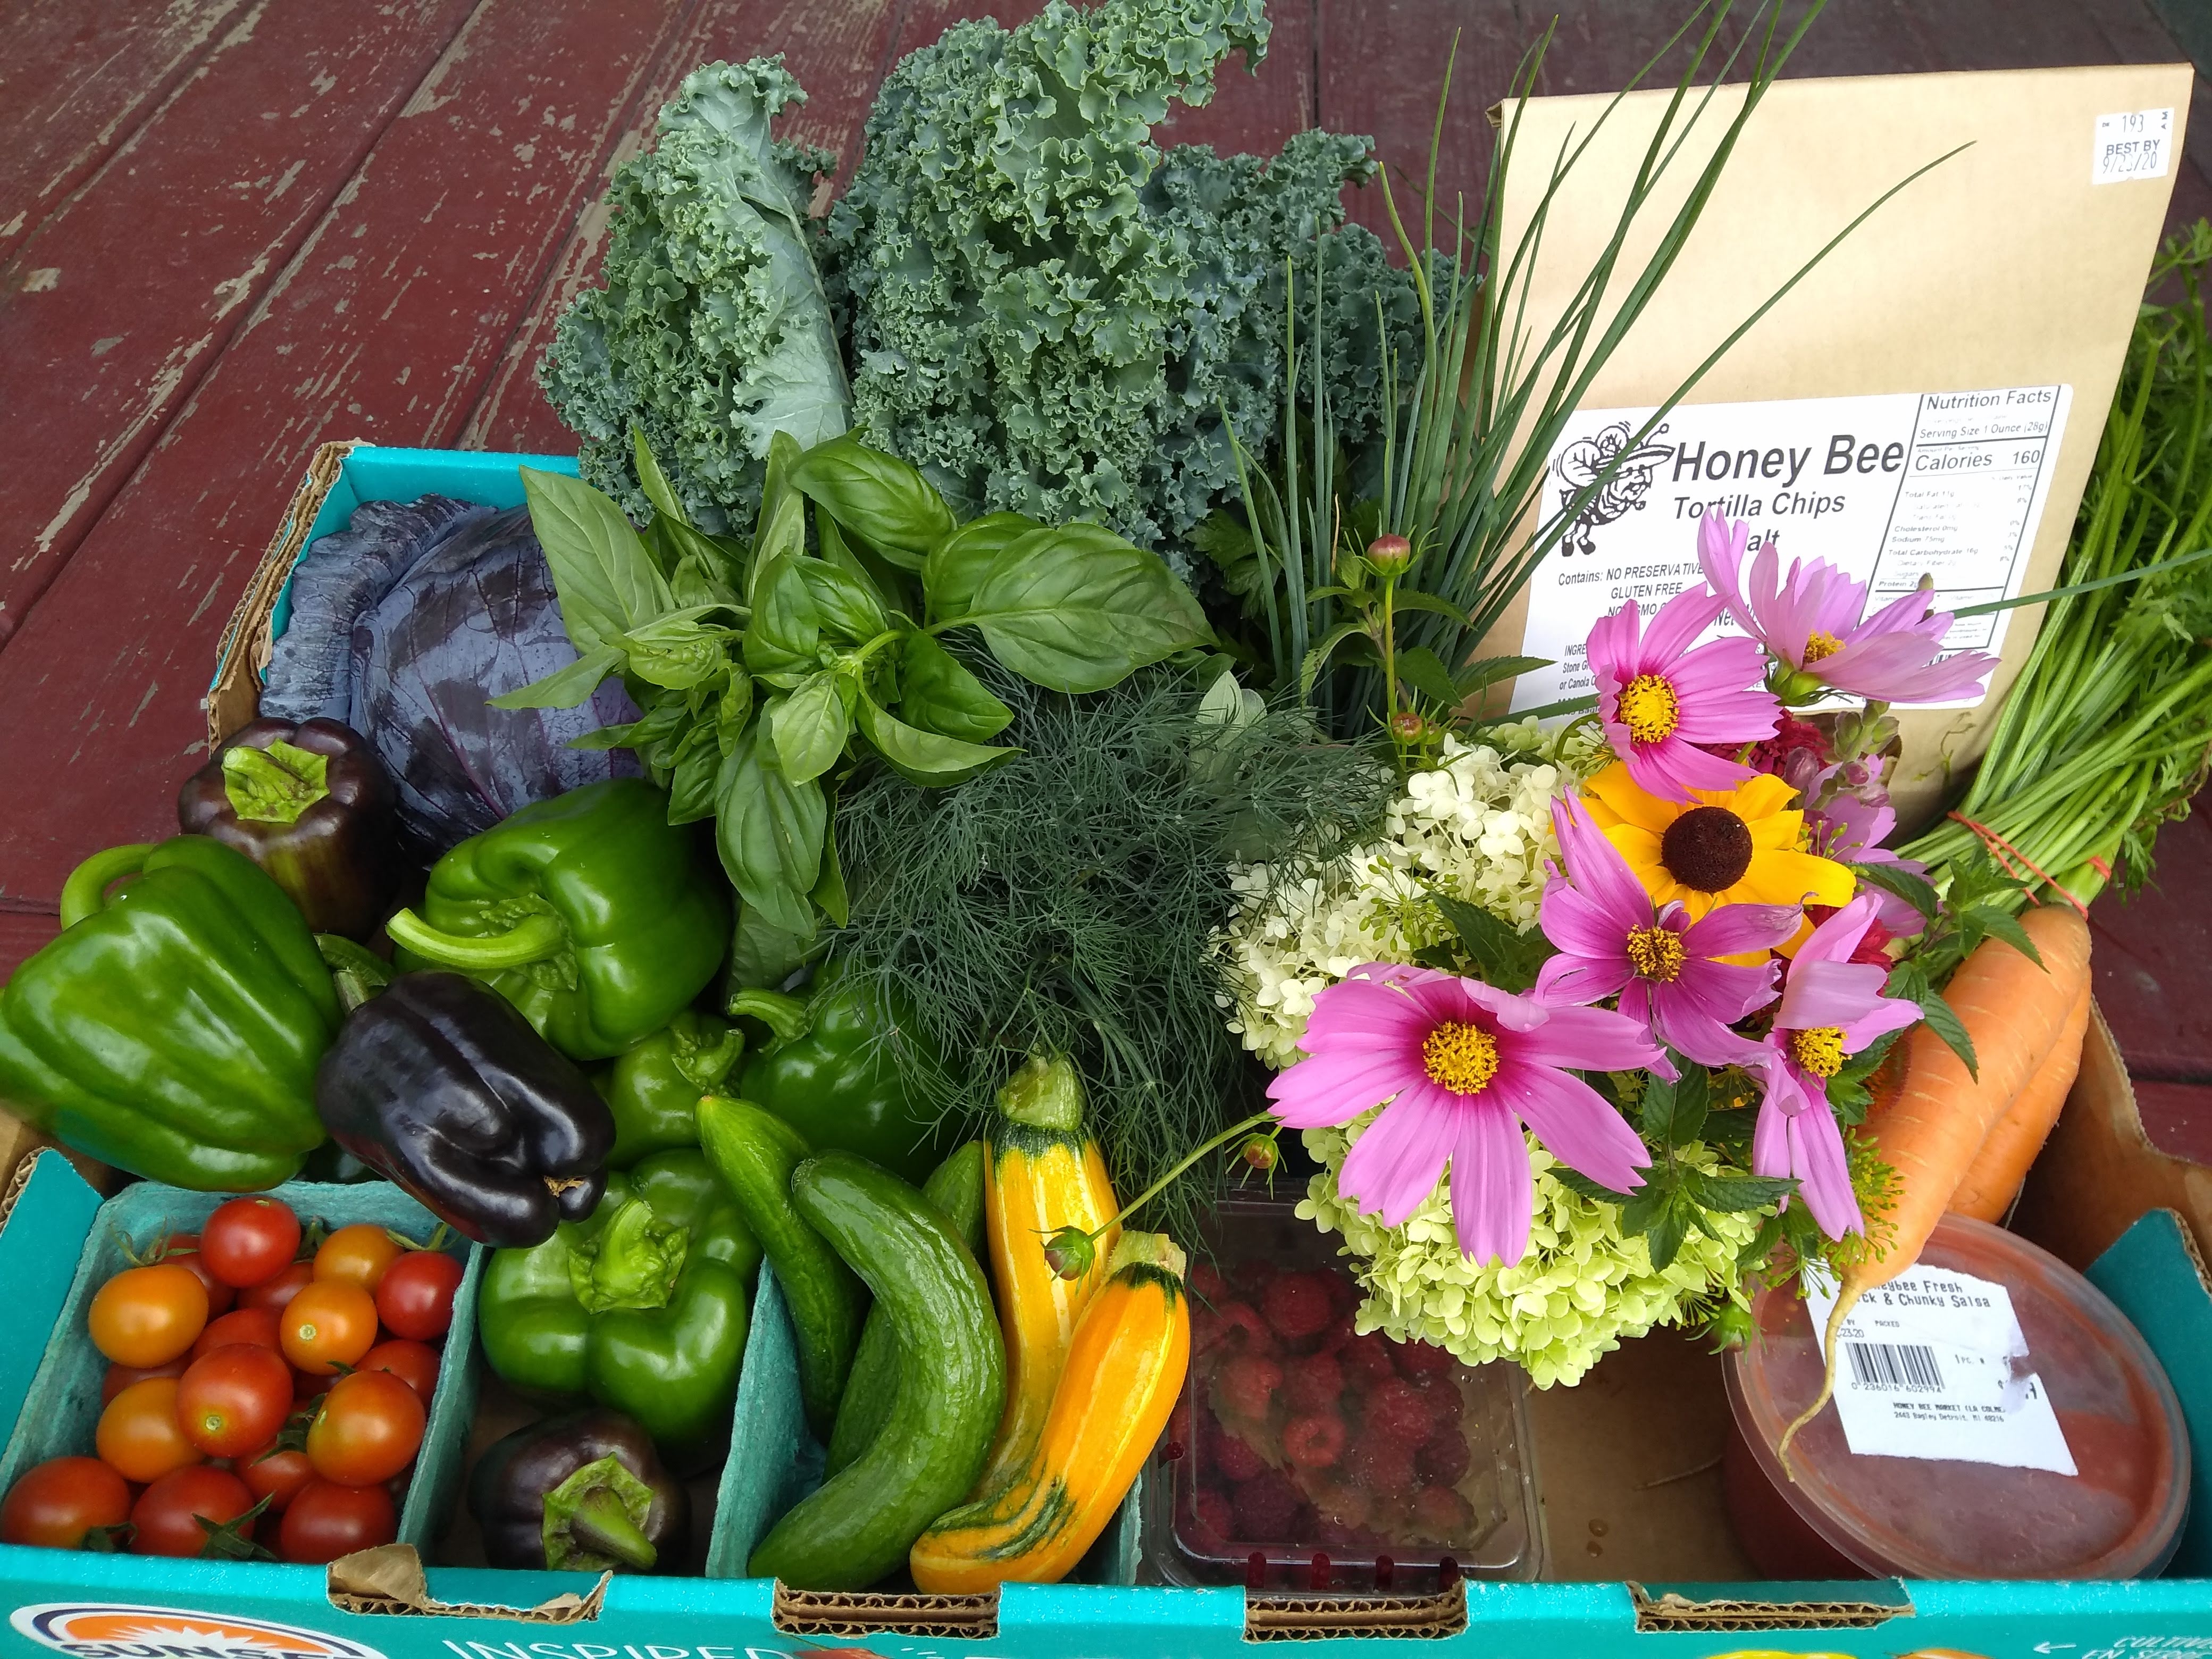 CSA box containing fresh fruits and vegetables for early care and education providers.